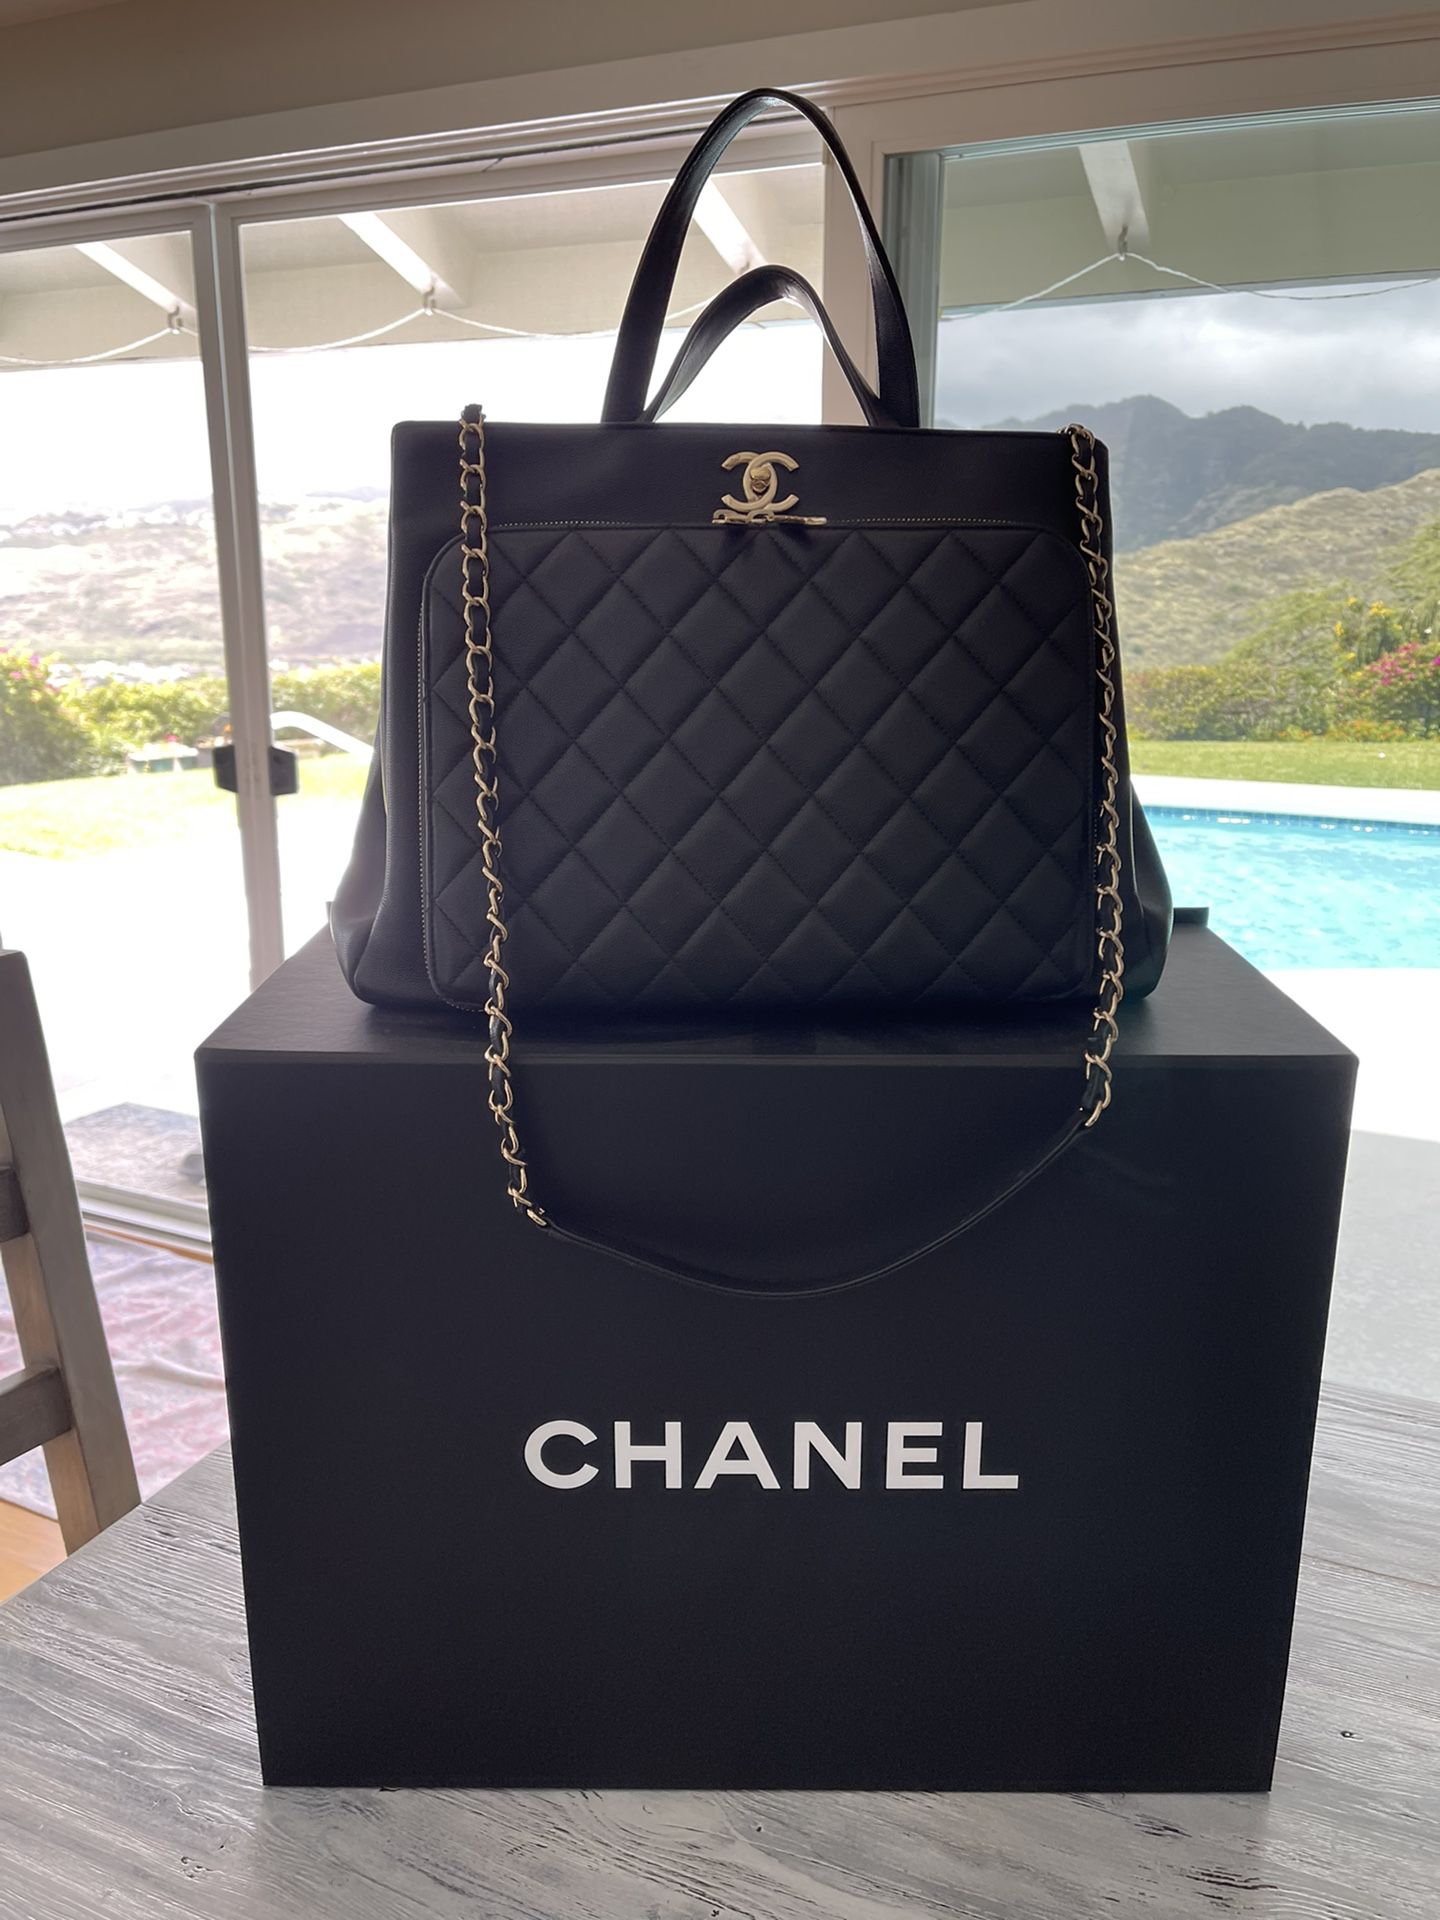 Chanel 2018 Chanel Small Business Affinity Shopping Bag - Neutrals Totes,  Handbags - CHA392724